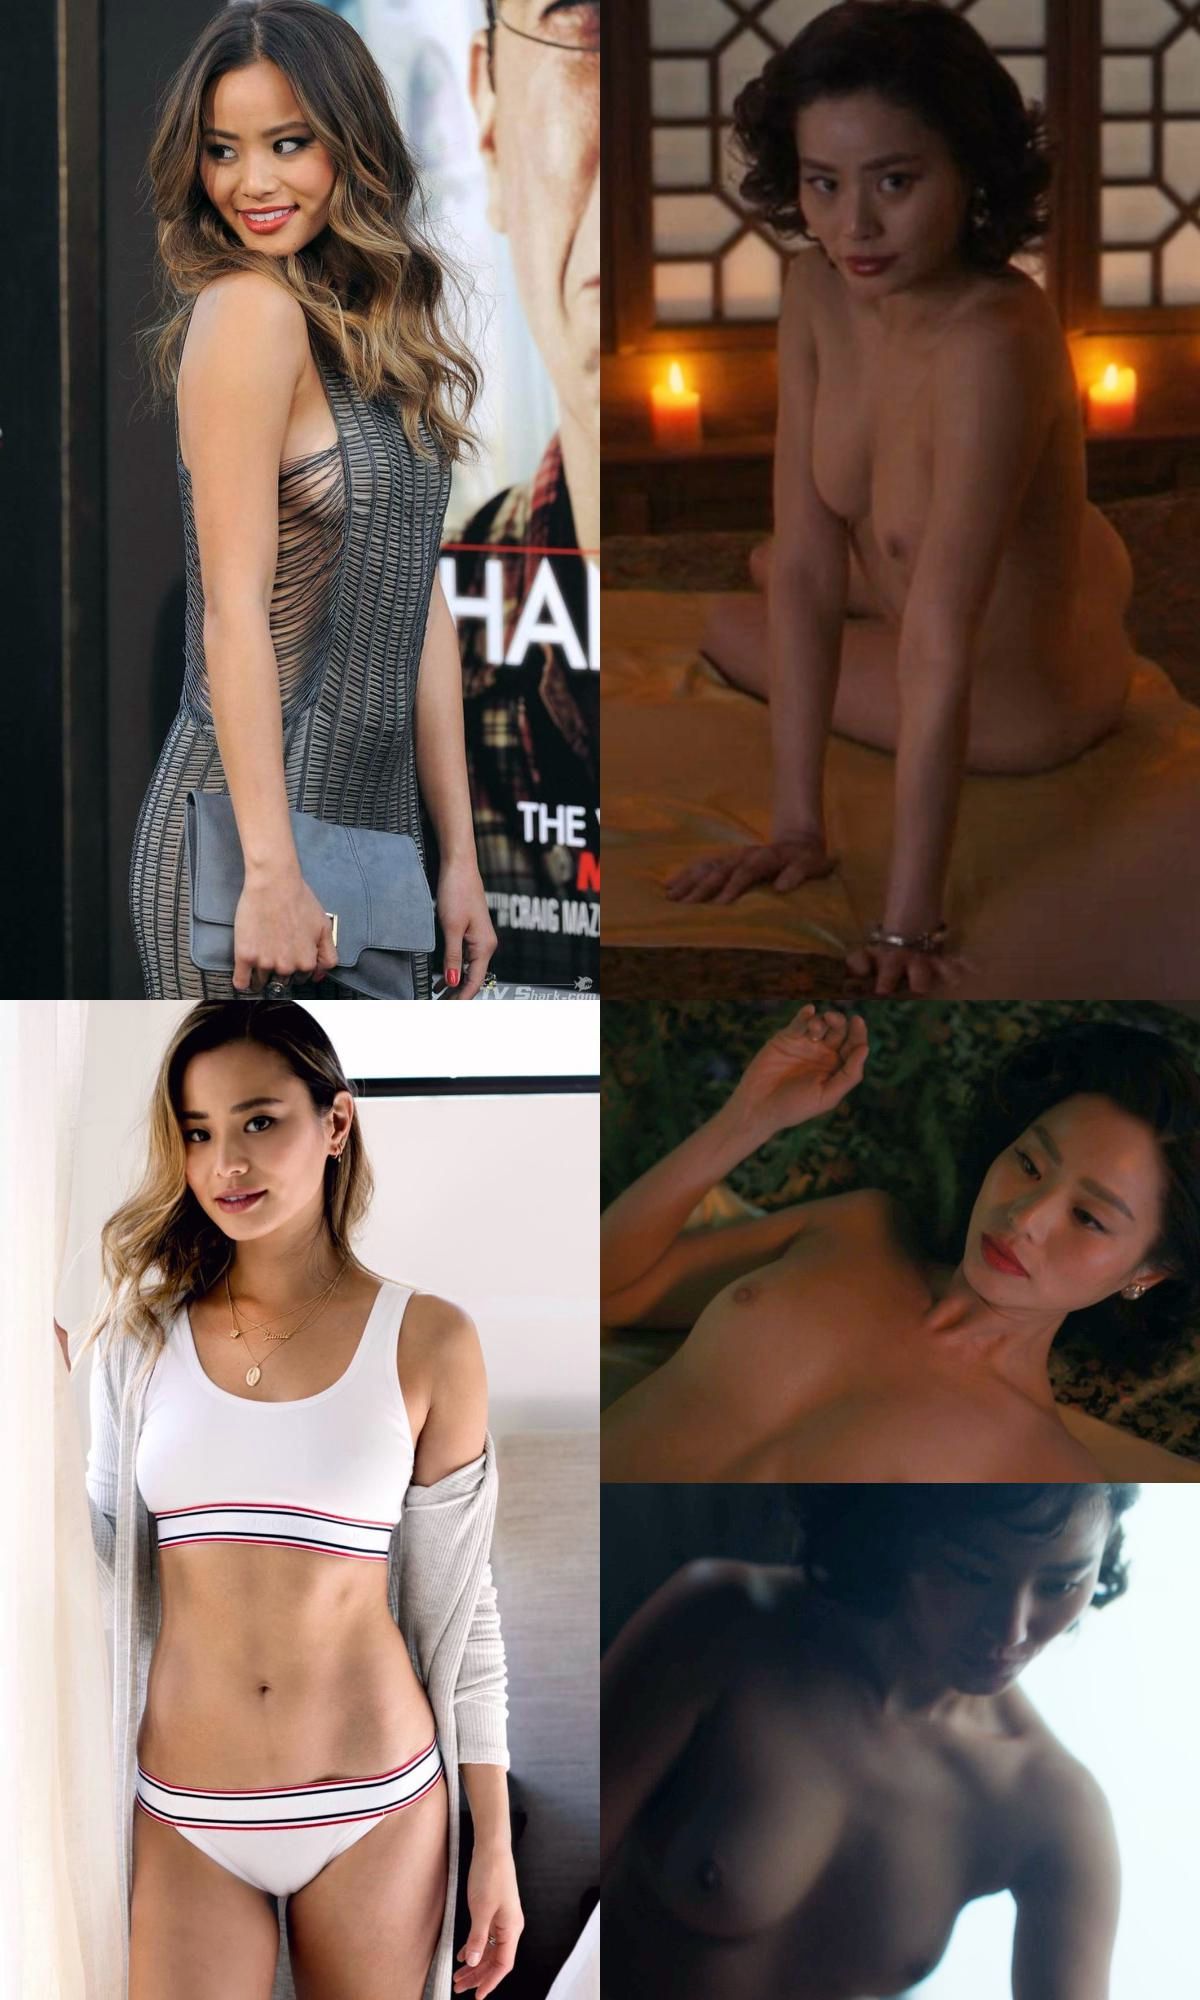 dean tayler recommends jamie chung nude photos pic